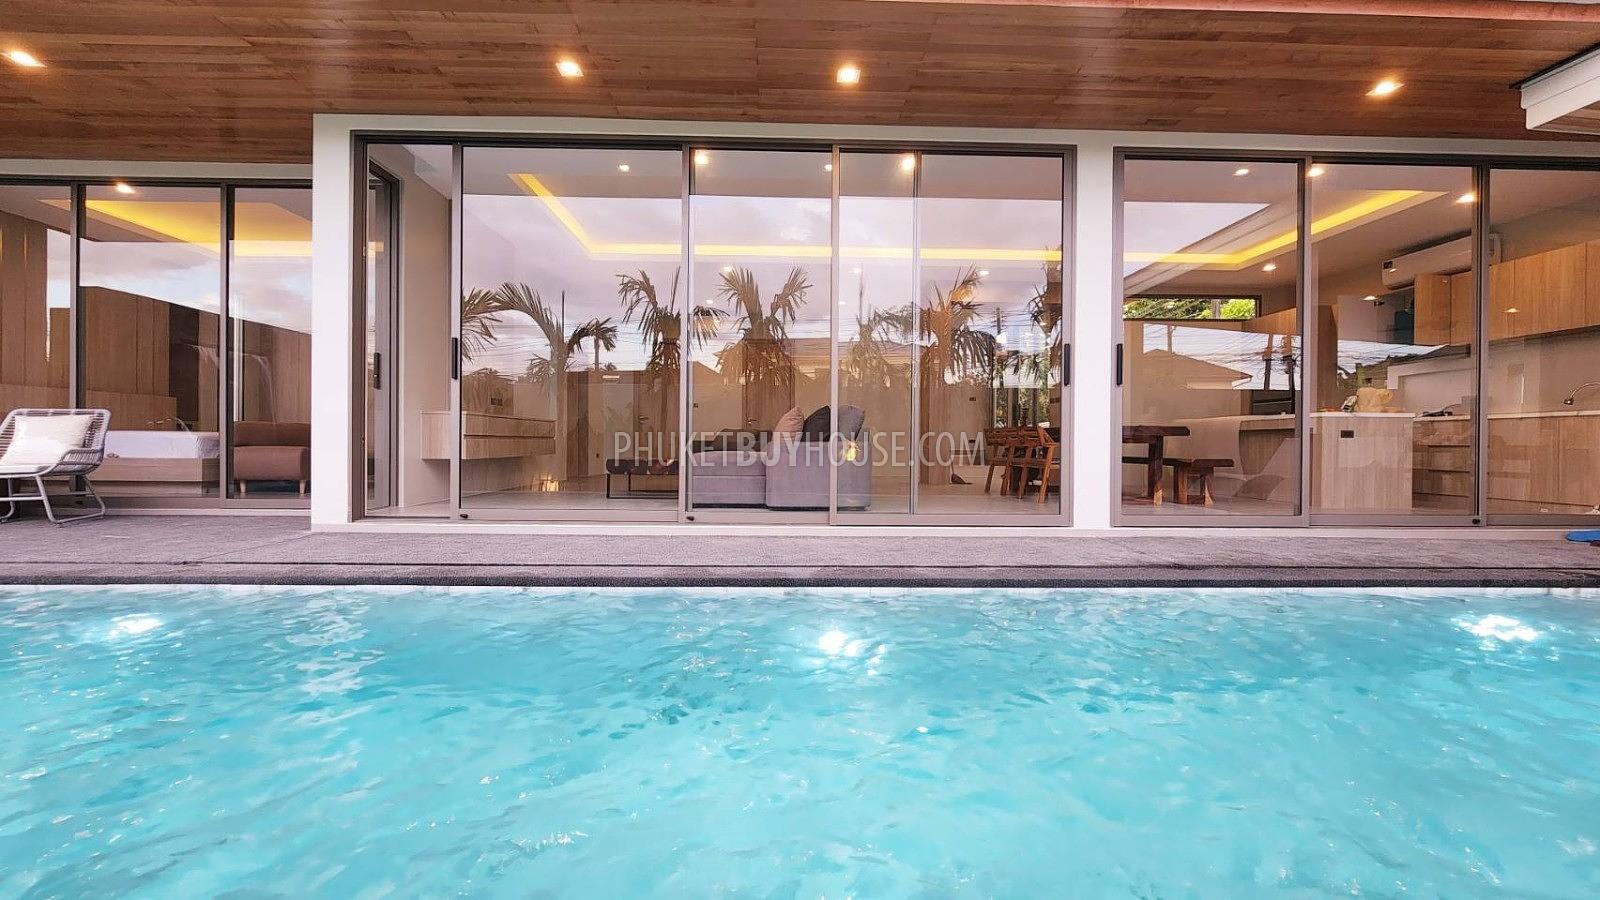 CHA22041: Modern Villa with 4 Bedrooms For Sale in Chalong. Photo #40